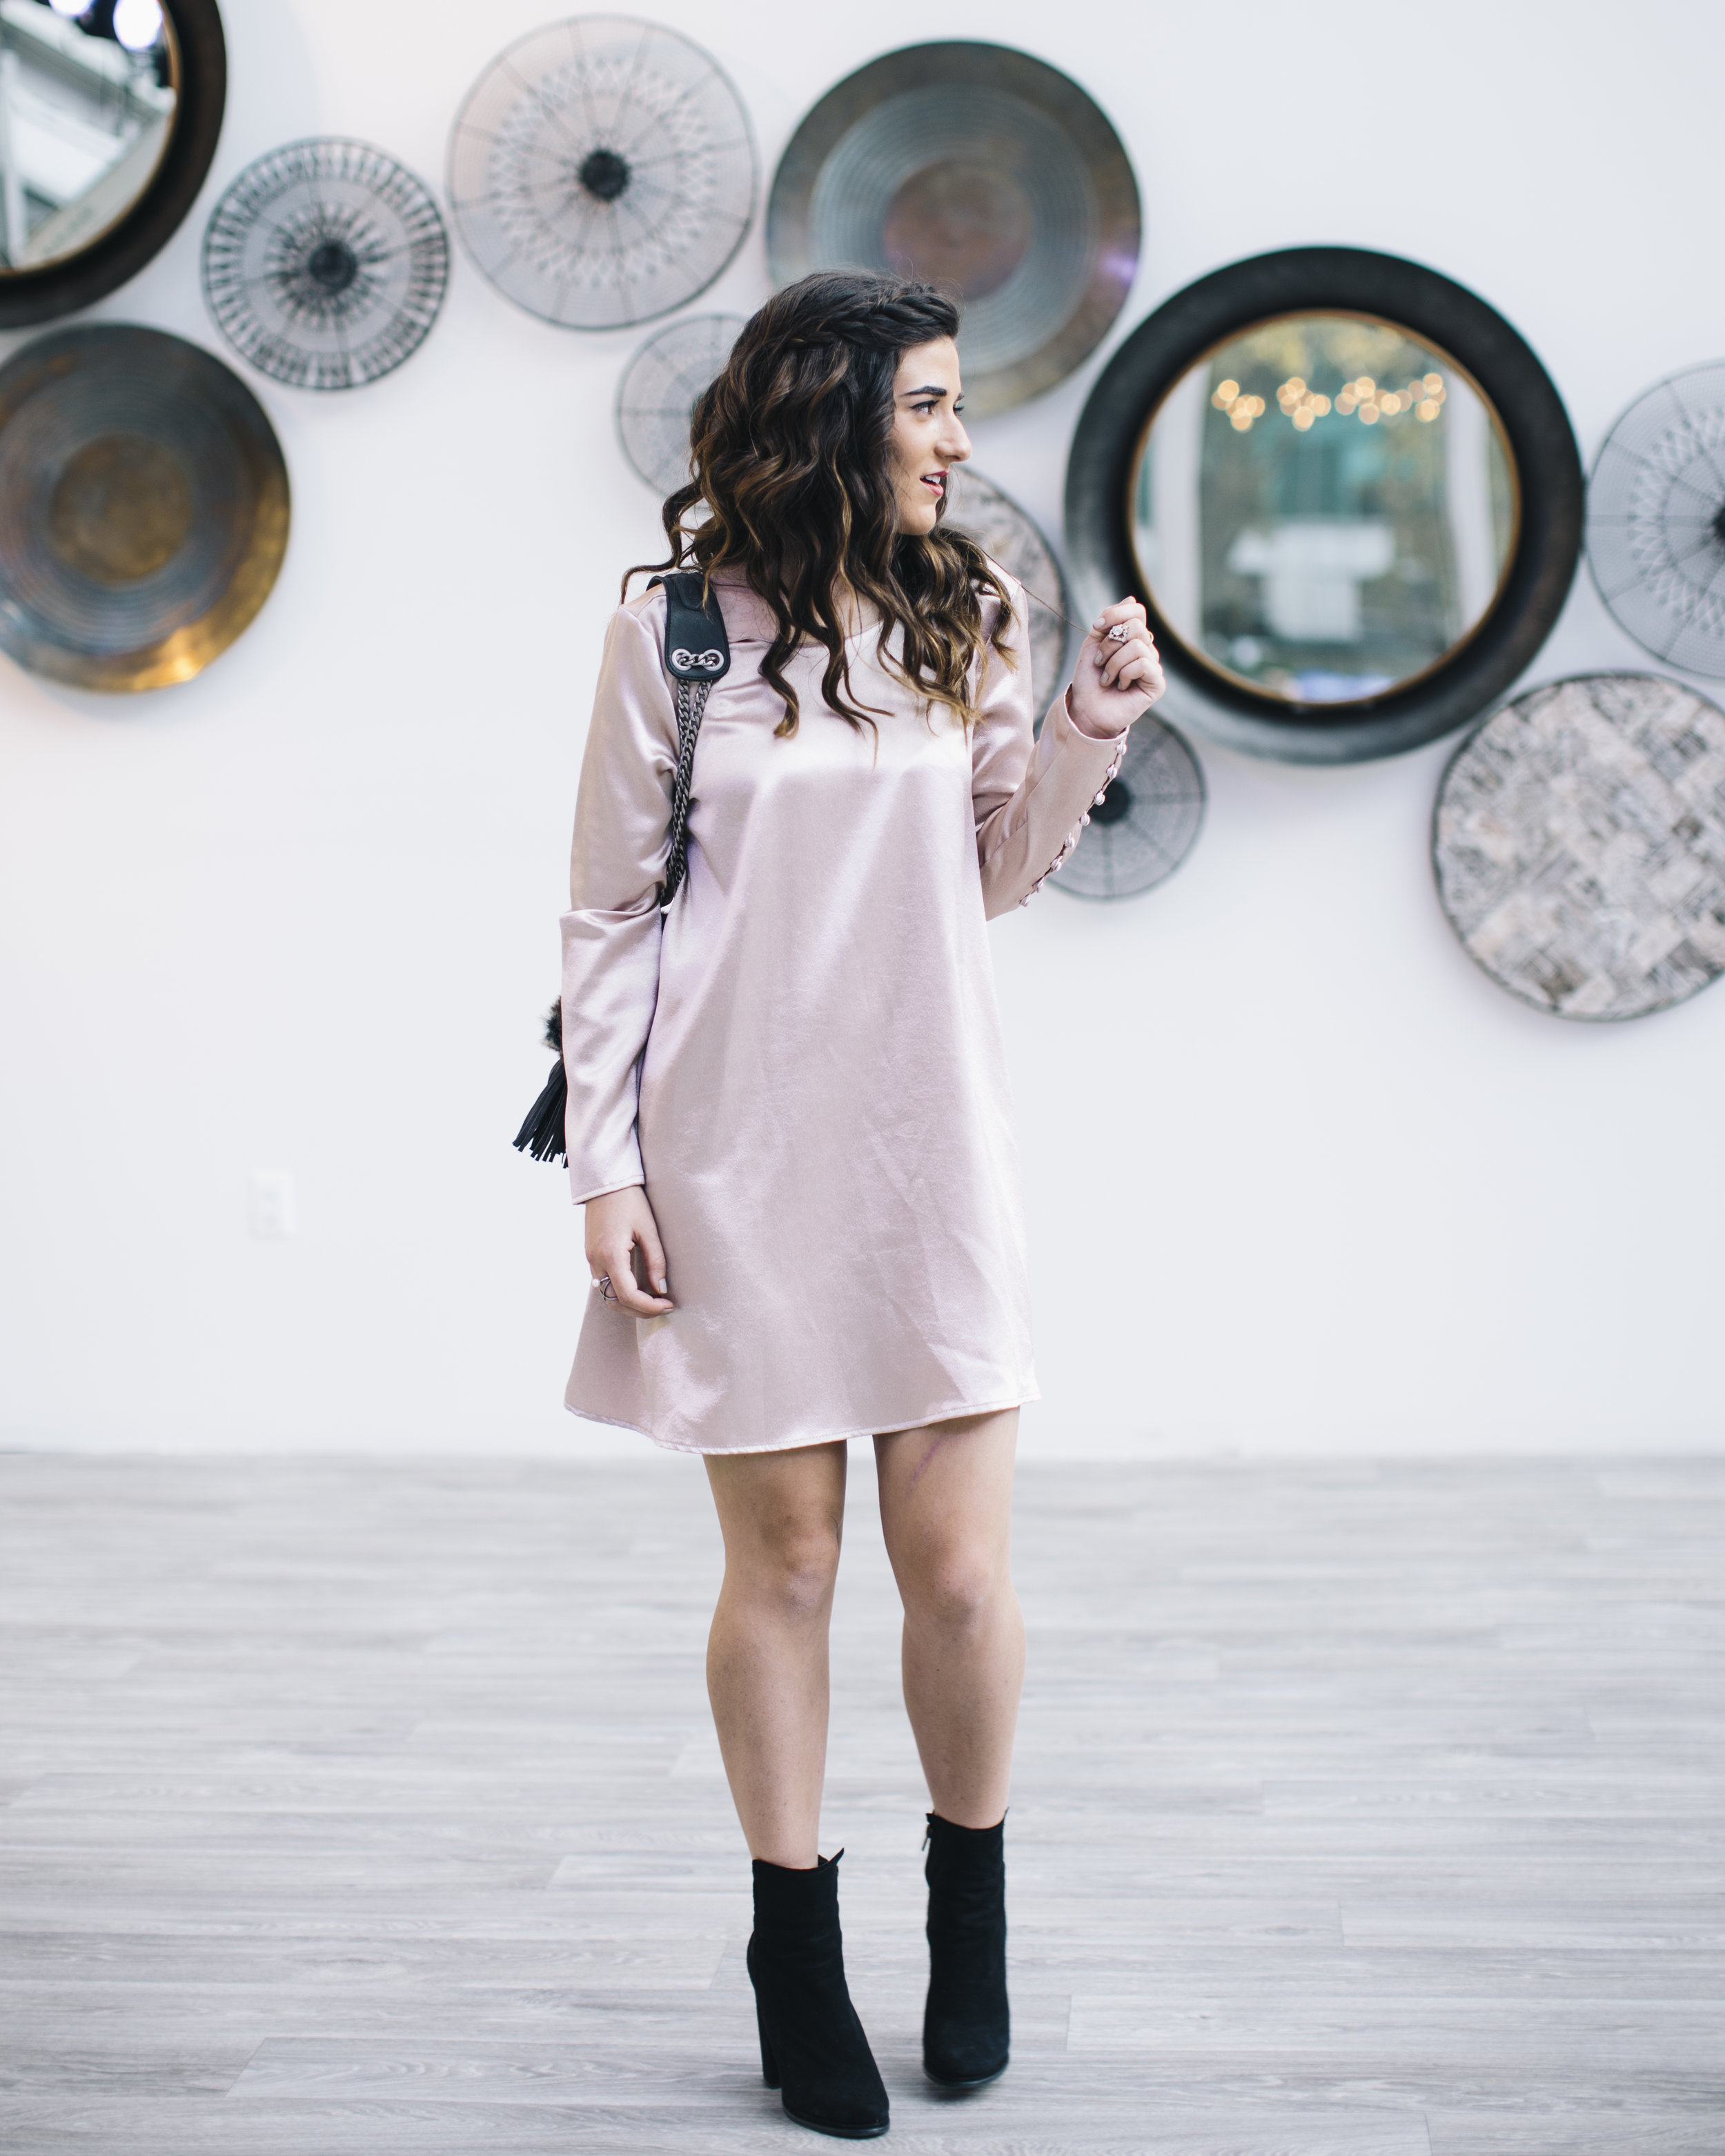 Blush Dress Faux-Fur Bag Q&A On Blogger Collaborations Louboutins & Love Fashion Blog Esther Santer NYC Street Style Blogger Outfit OOTD Trendy Shoes Black Booties Online Shopping Purse Pretty Girl Women Hair Pink Braid Inspo Holiday Lifestyle Clothes.jpg